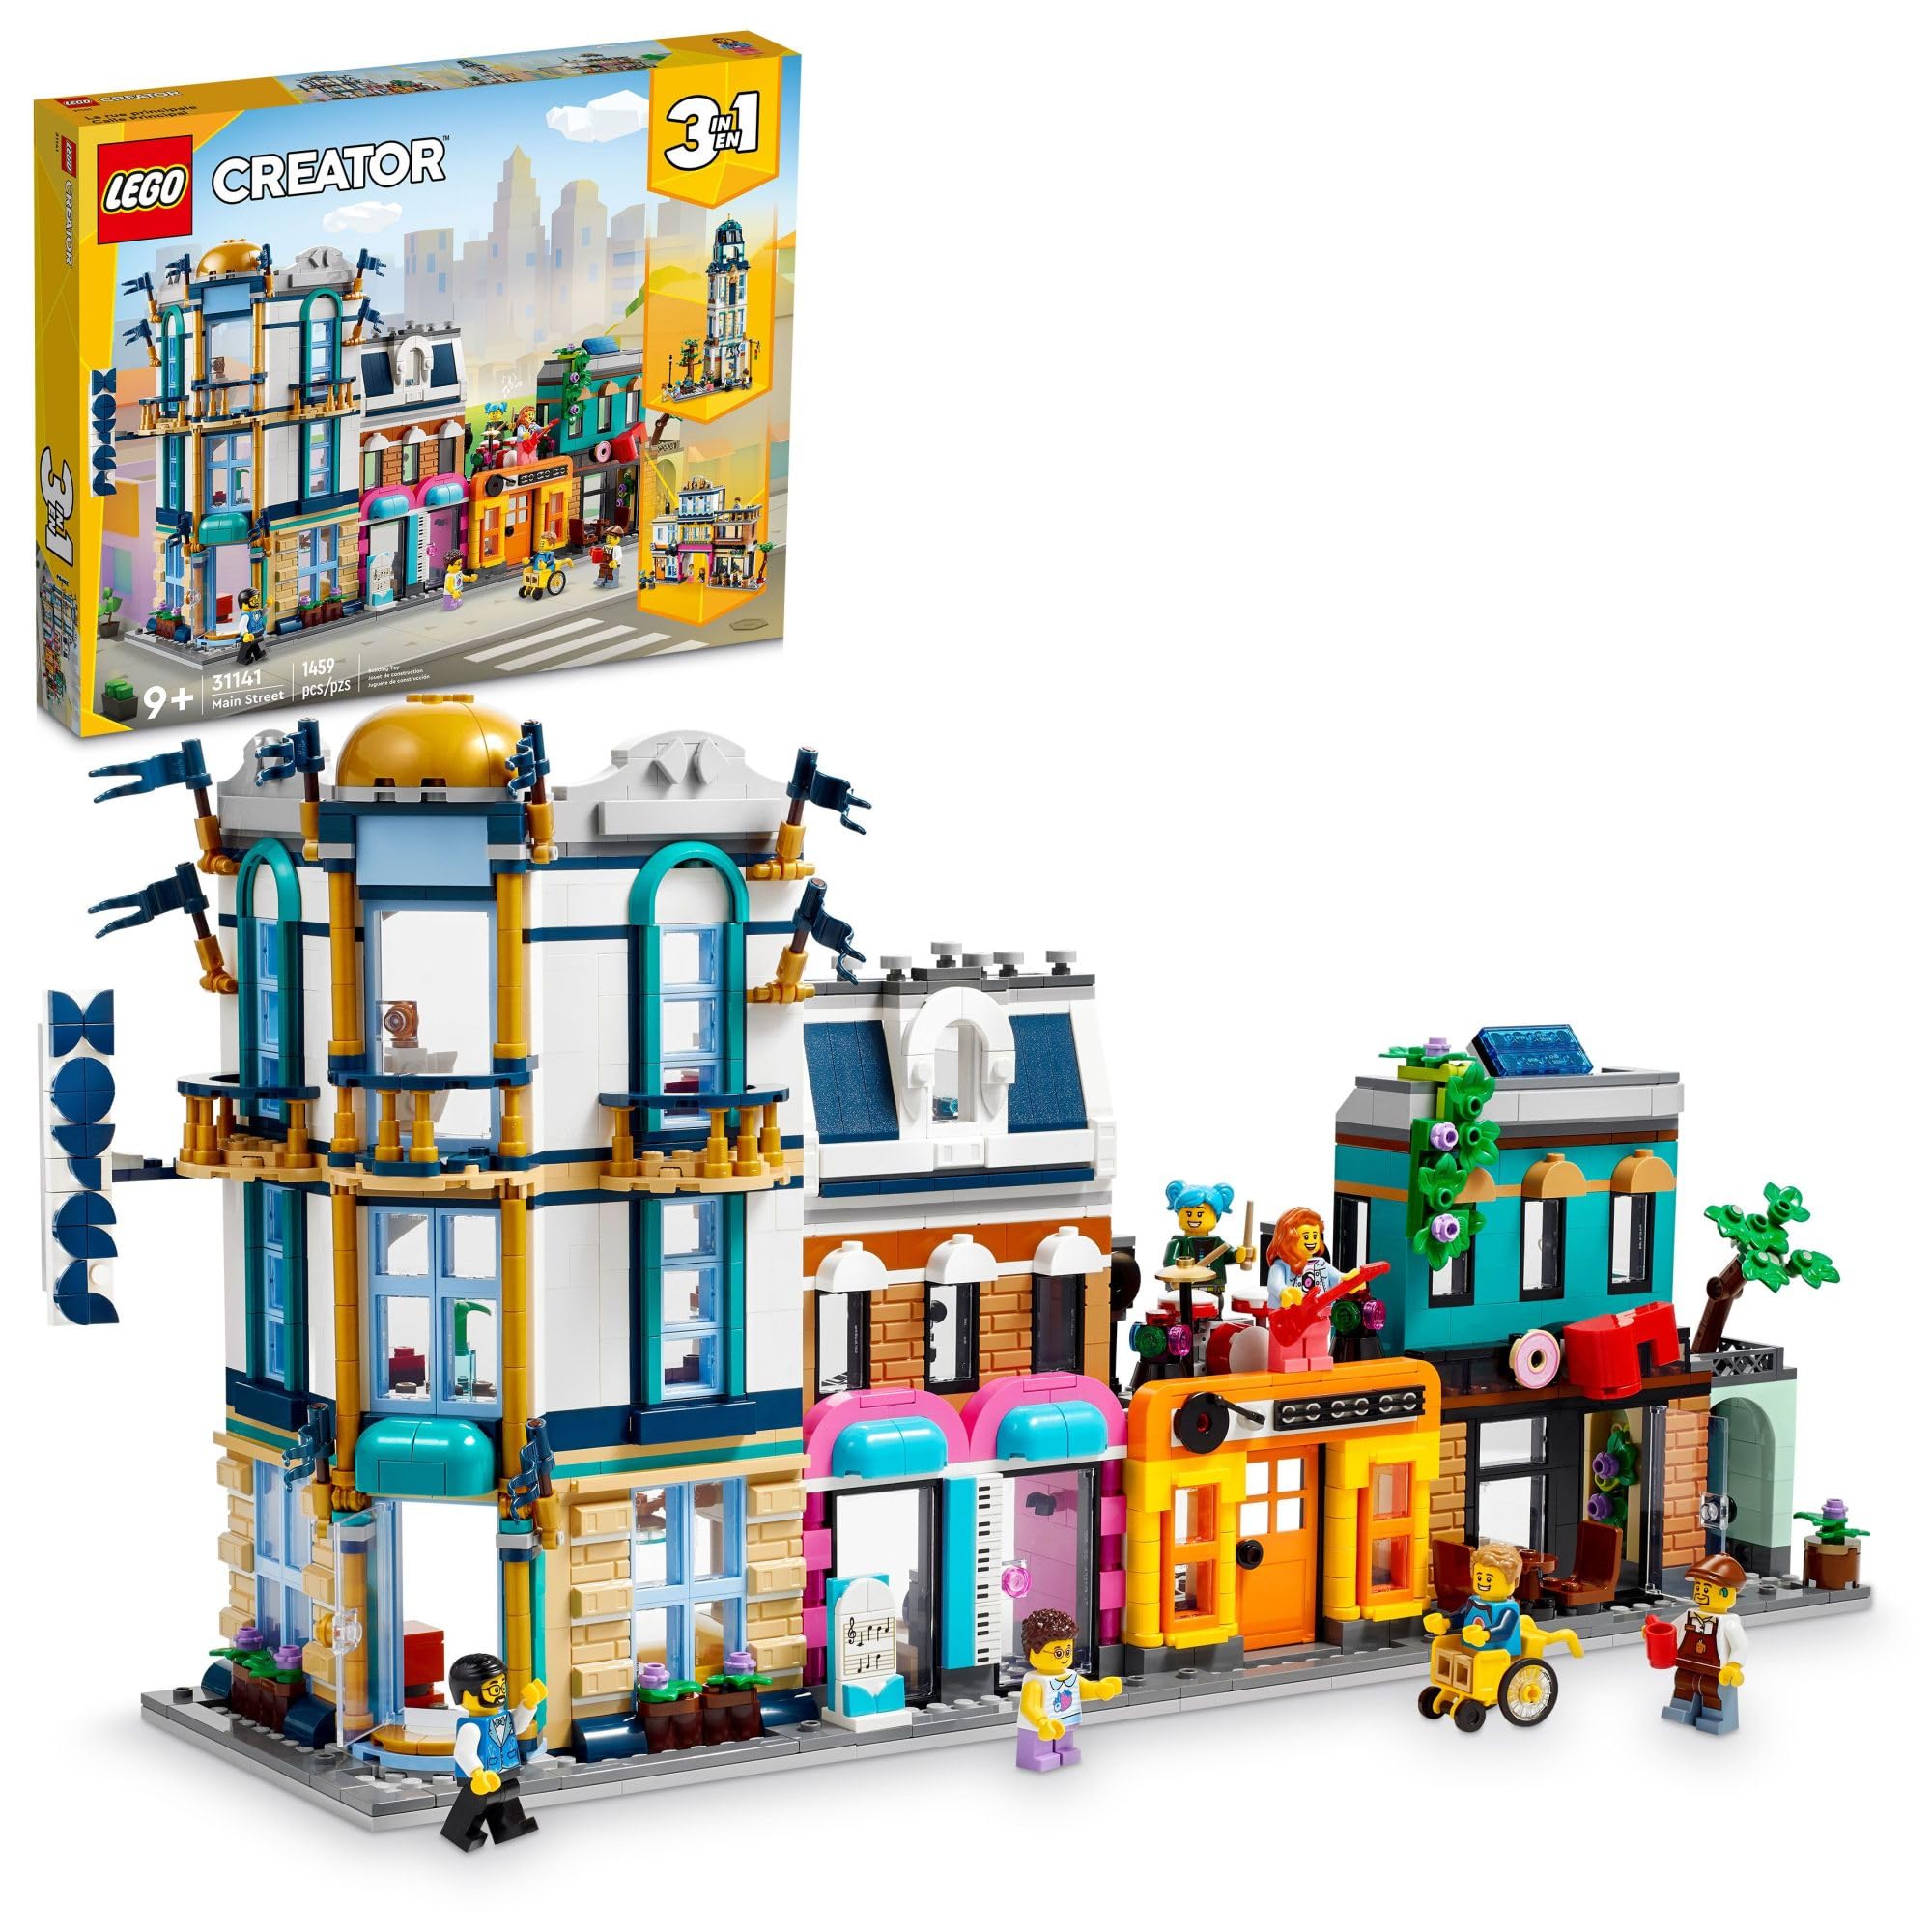 LEGO Creator Main Street 31141 Building Toy Set, 3 in 1 Features a Toy City Art Deco Building, Market Street Hotel, Café Music Store and 6 Minifigures, Endless Play  Only $90.89